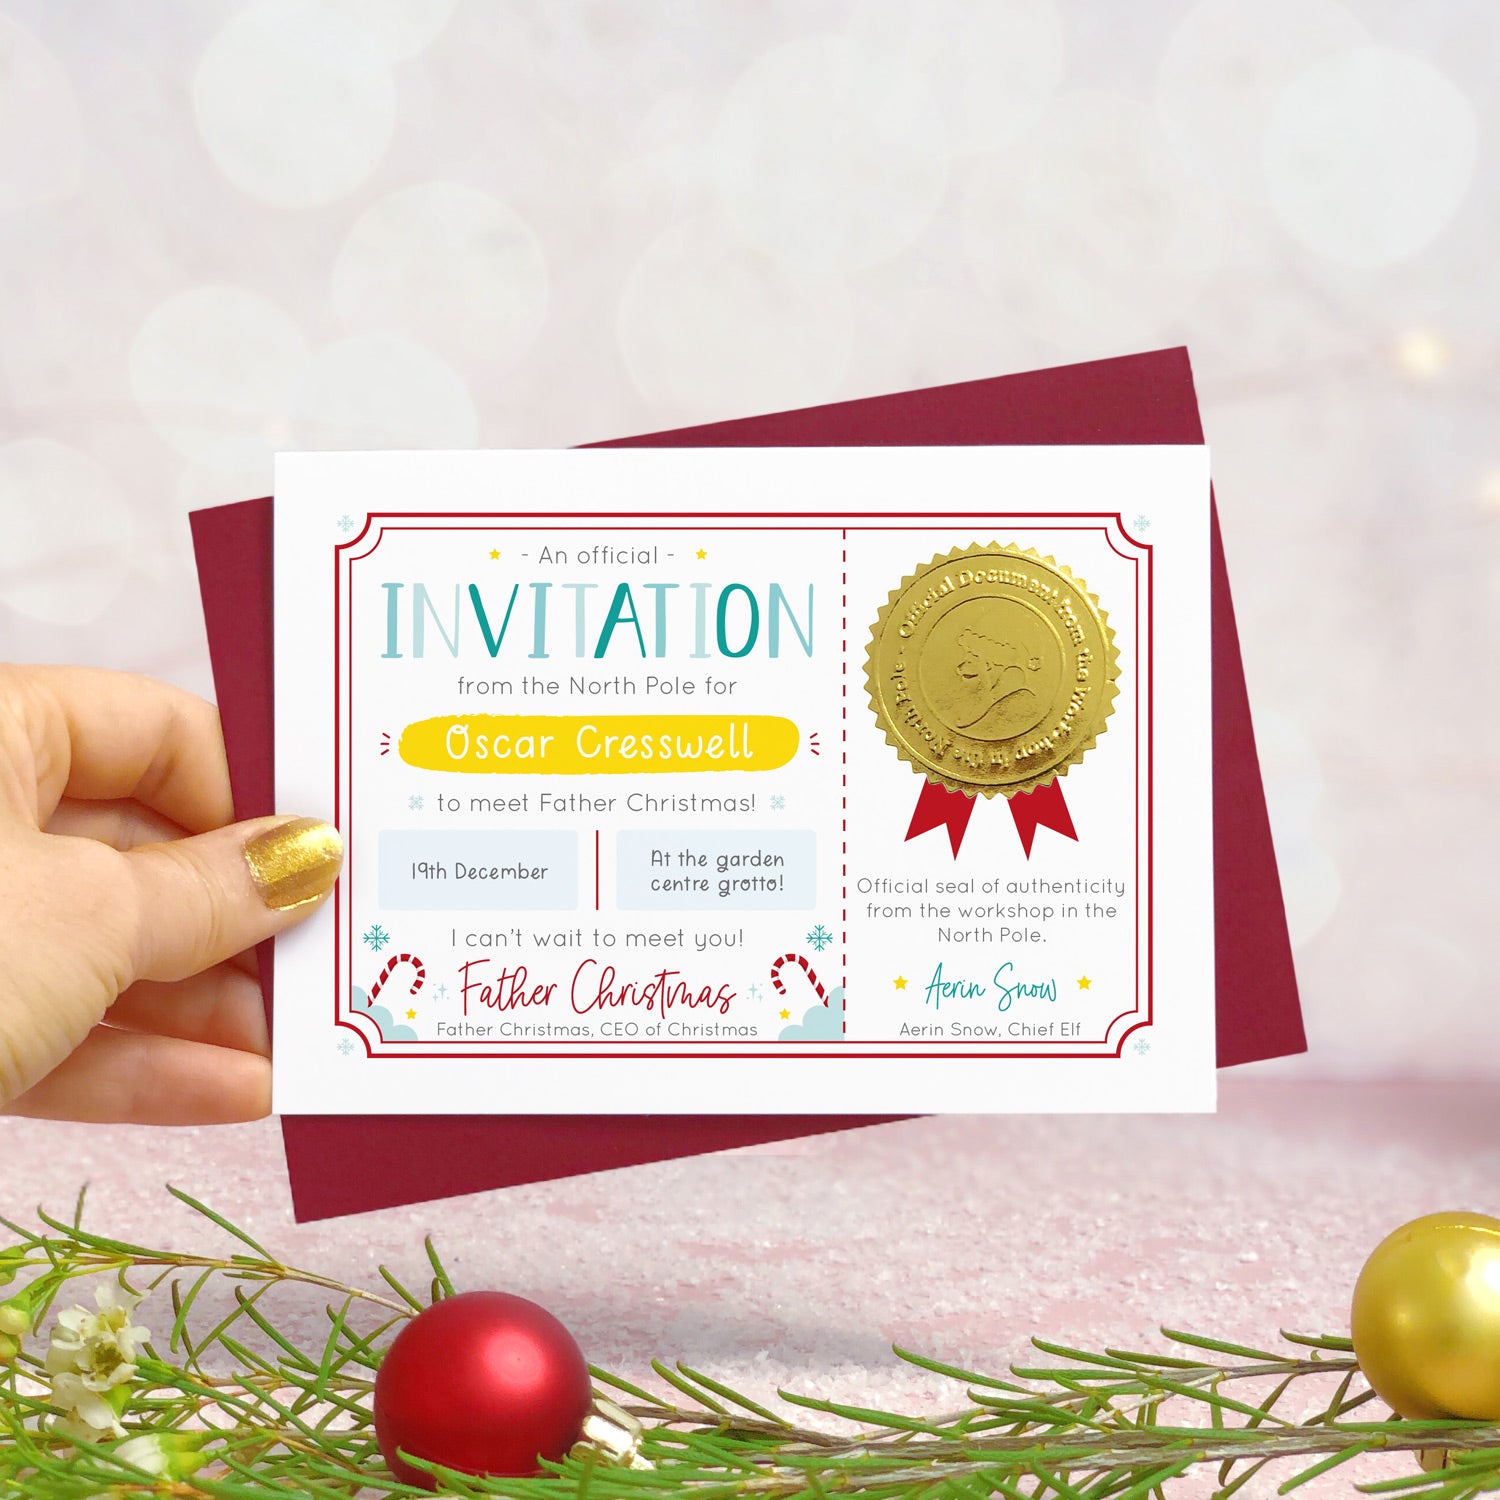 A personalised invitation certificate to visit Santa (or Father Christmas) photographed in hand in front of a grey and dusty pink background with foliage and baubles in the foreground. The card is personalised with a childs name, date of the visit to meet Father Christmas and the location. It also features a shiny gold seal with the face of a santa character.